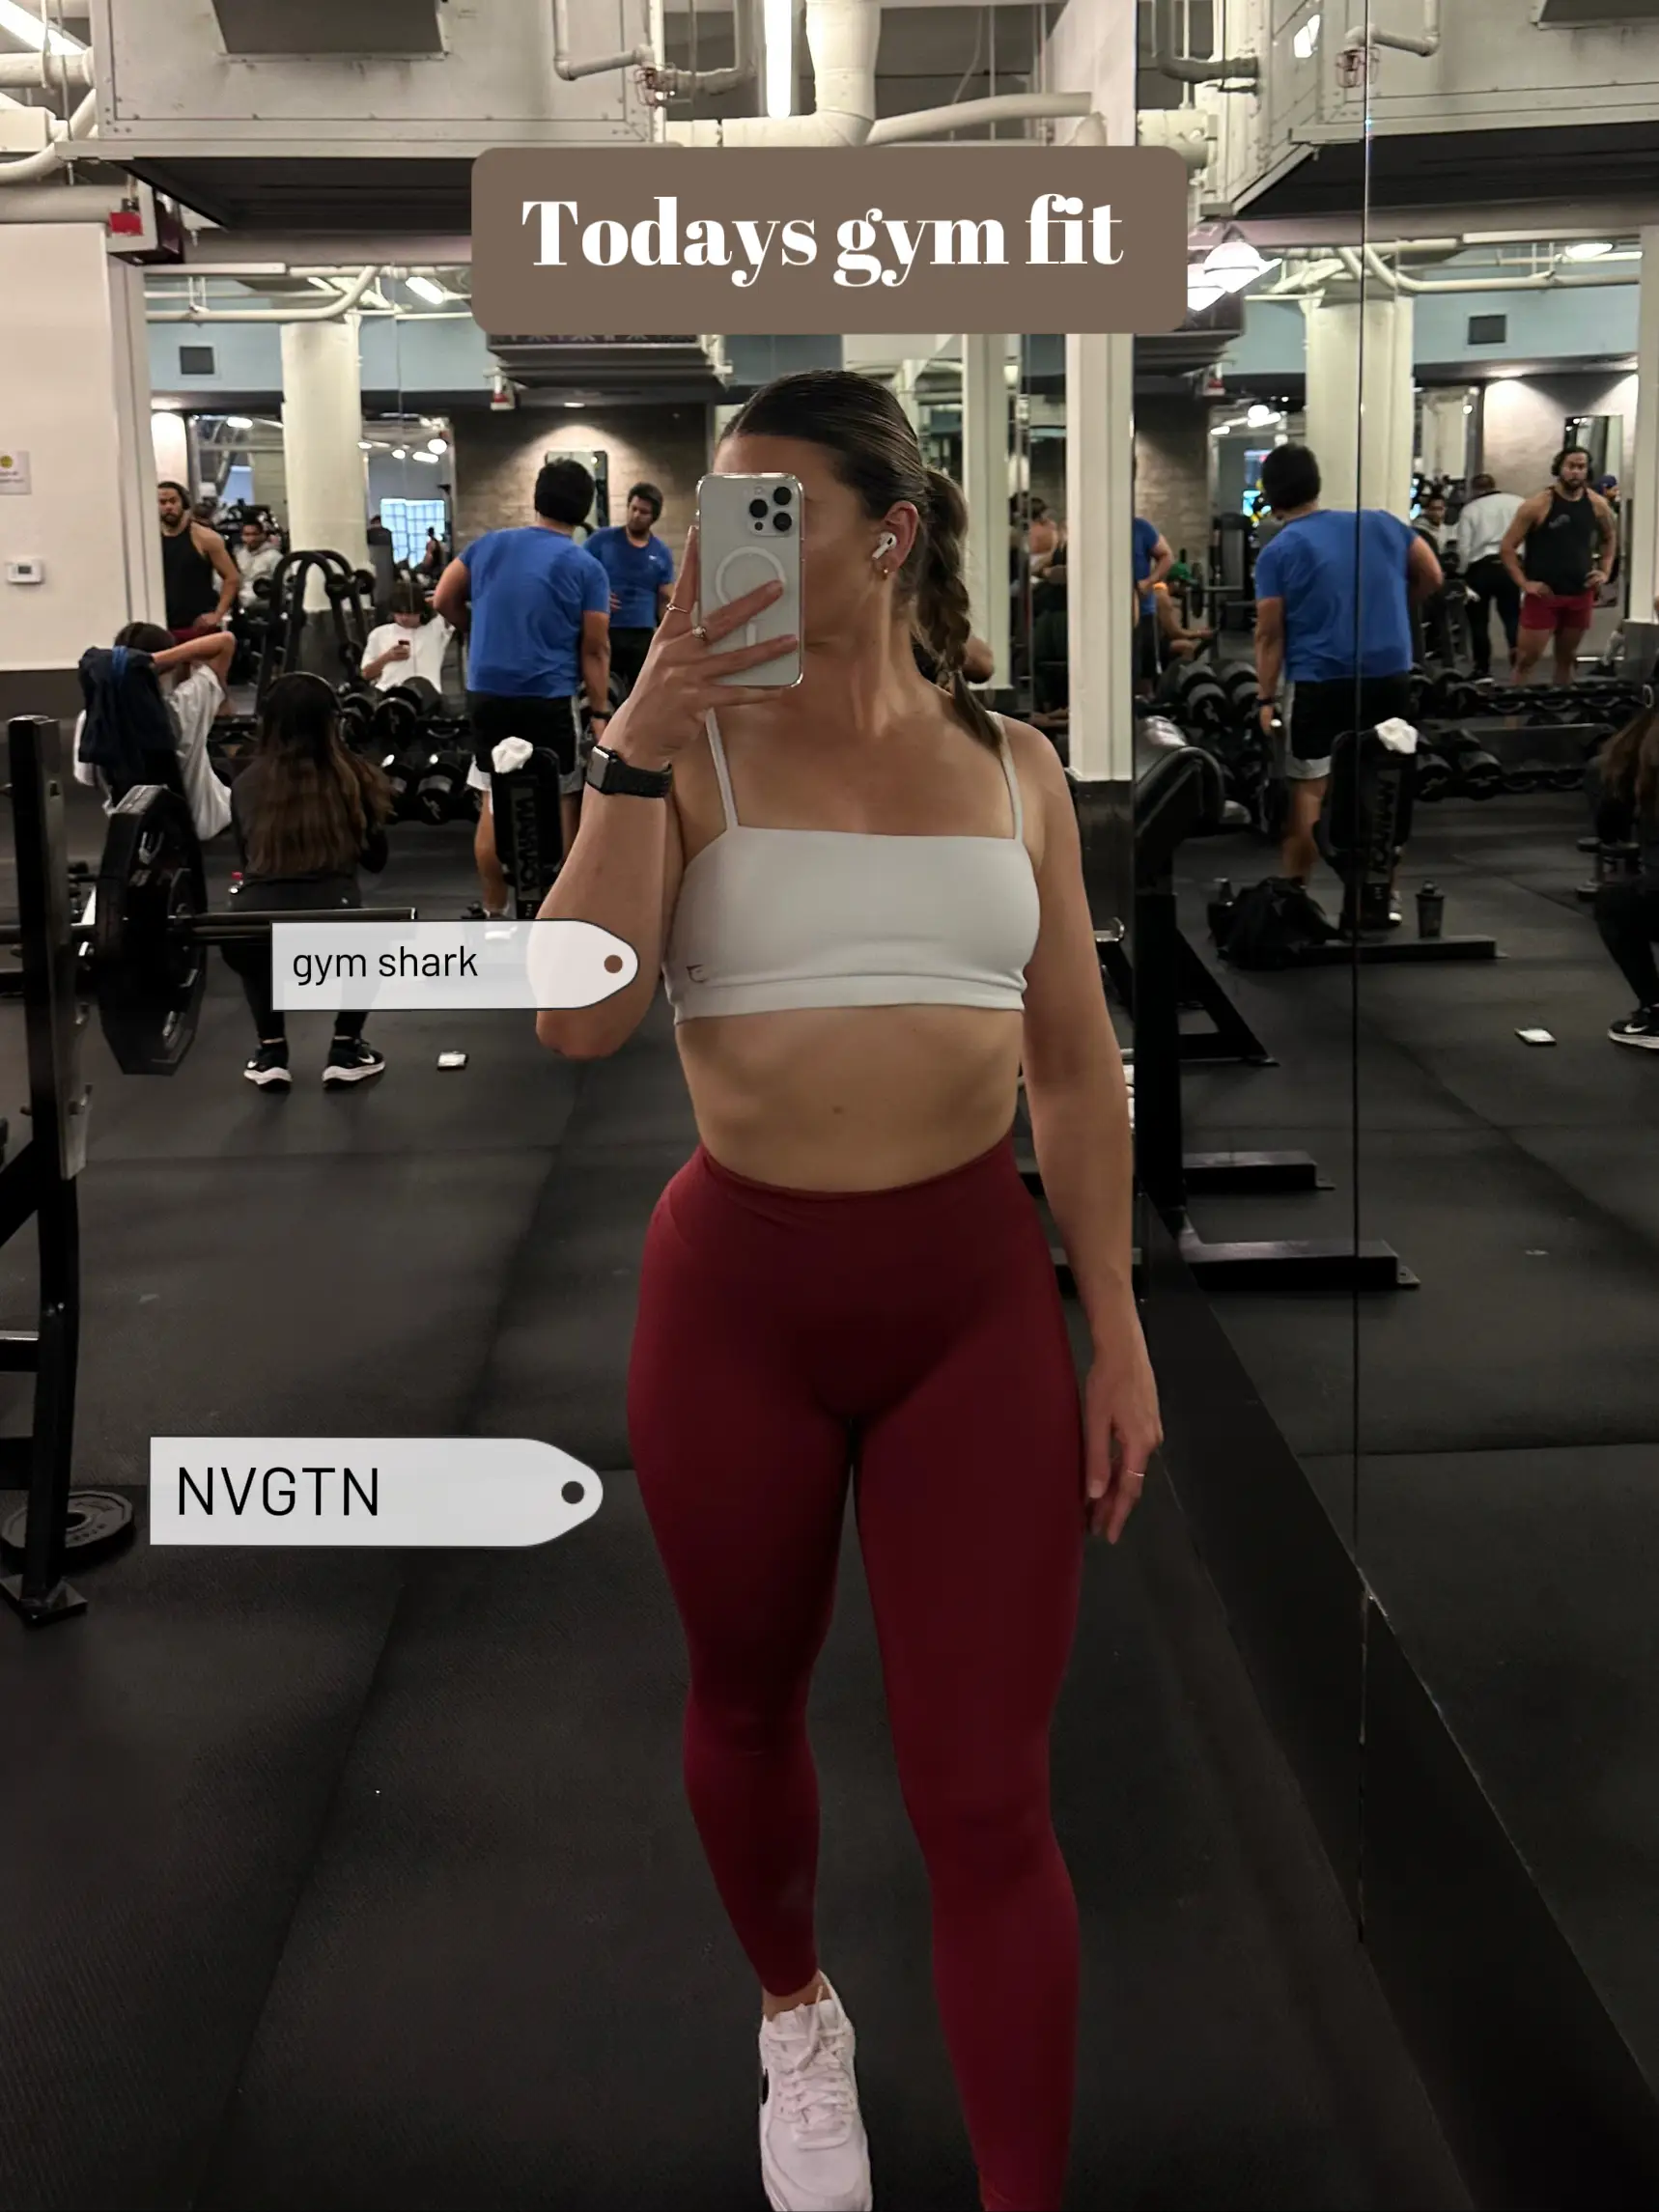 Gym fit, Gallery posted by Kaylee